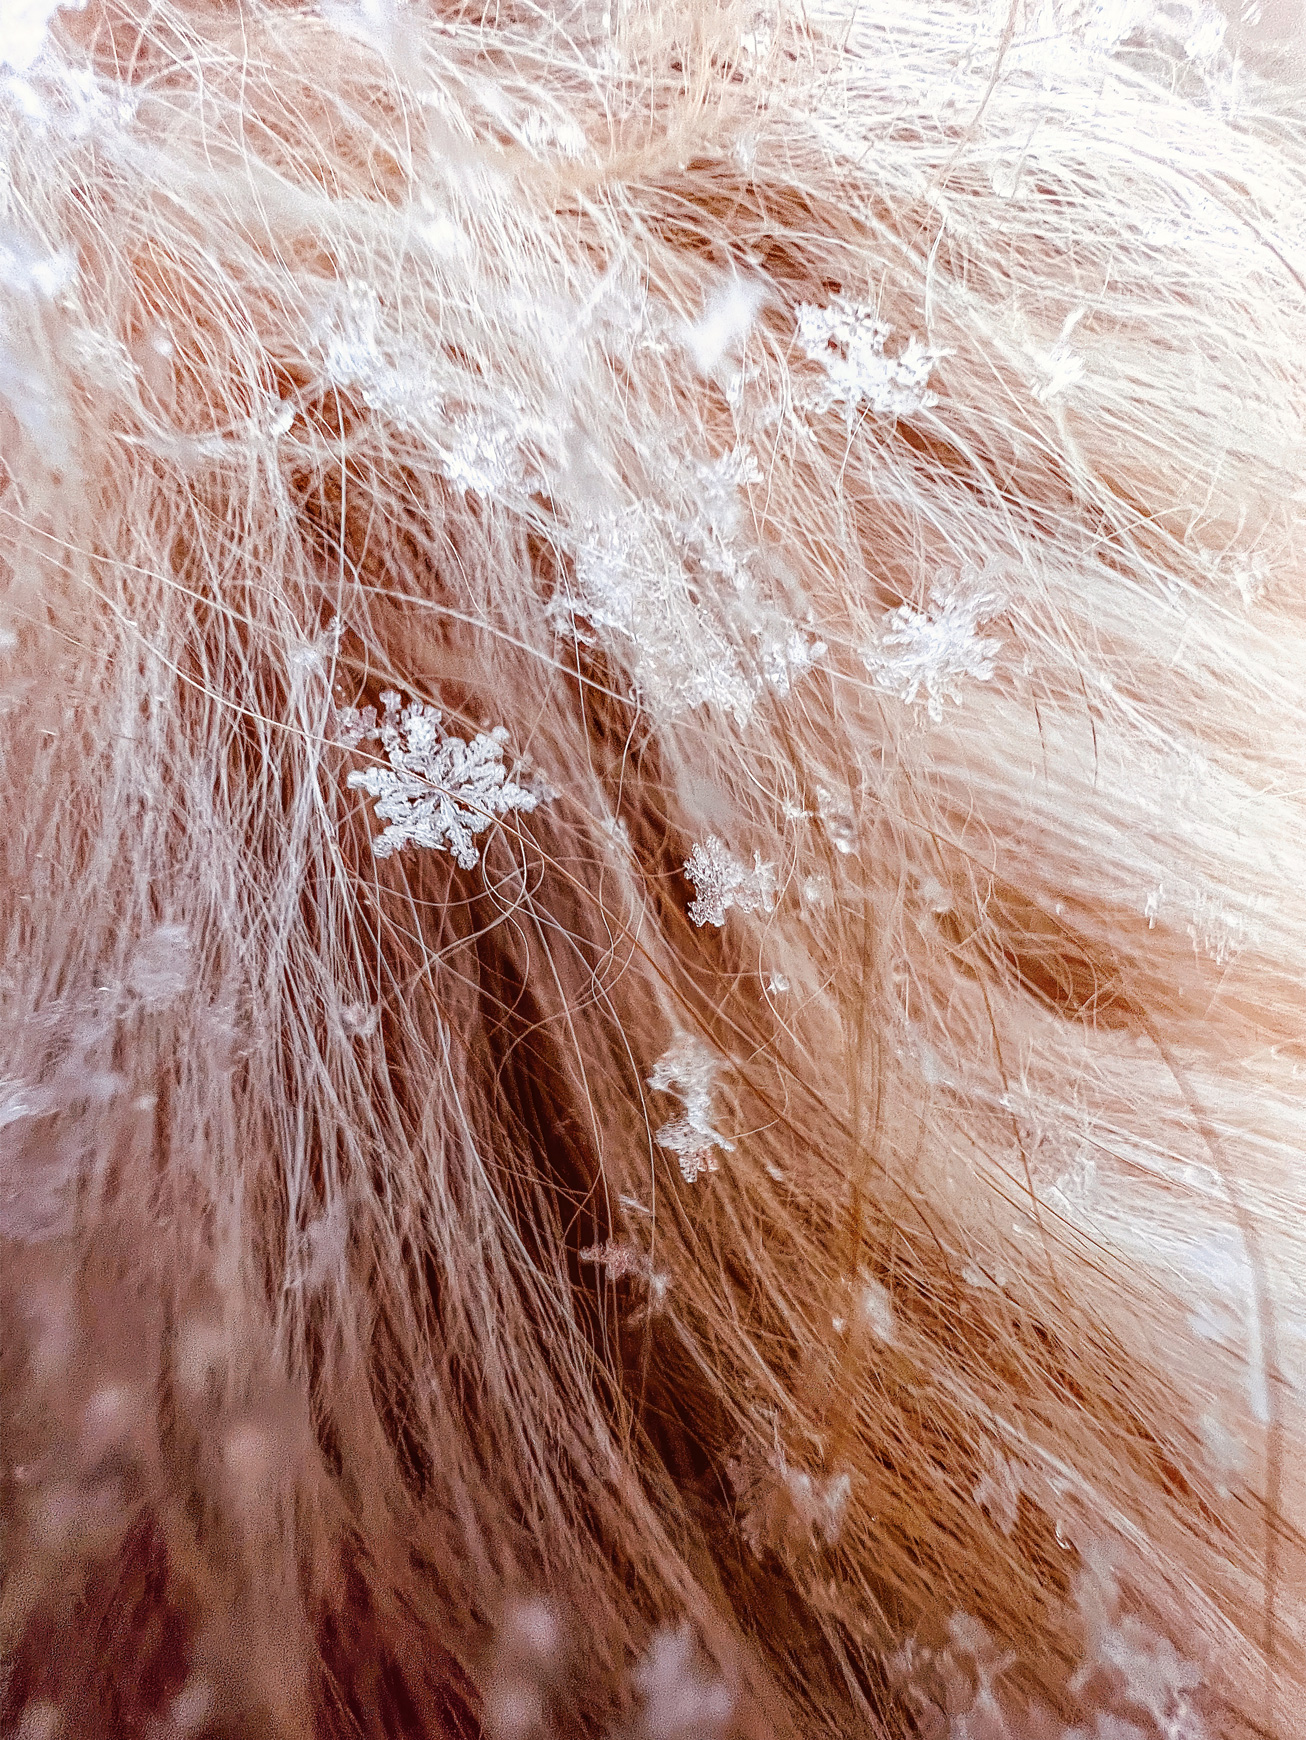 cose up shot of a snowflake in a dog's fur for apple shot on iphone macro challenge